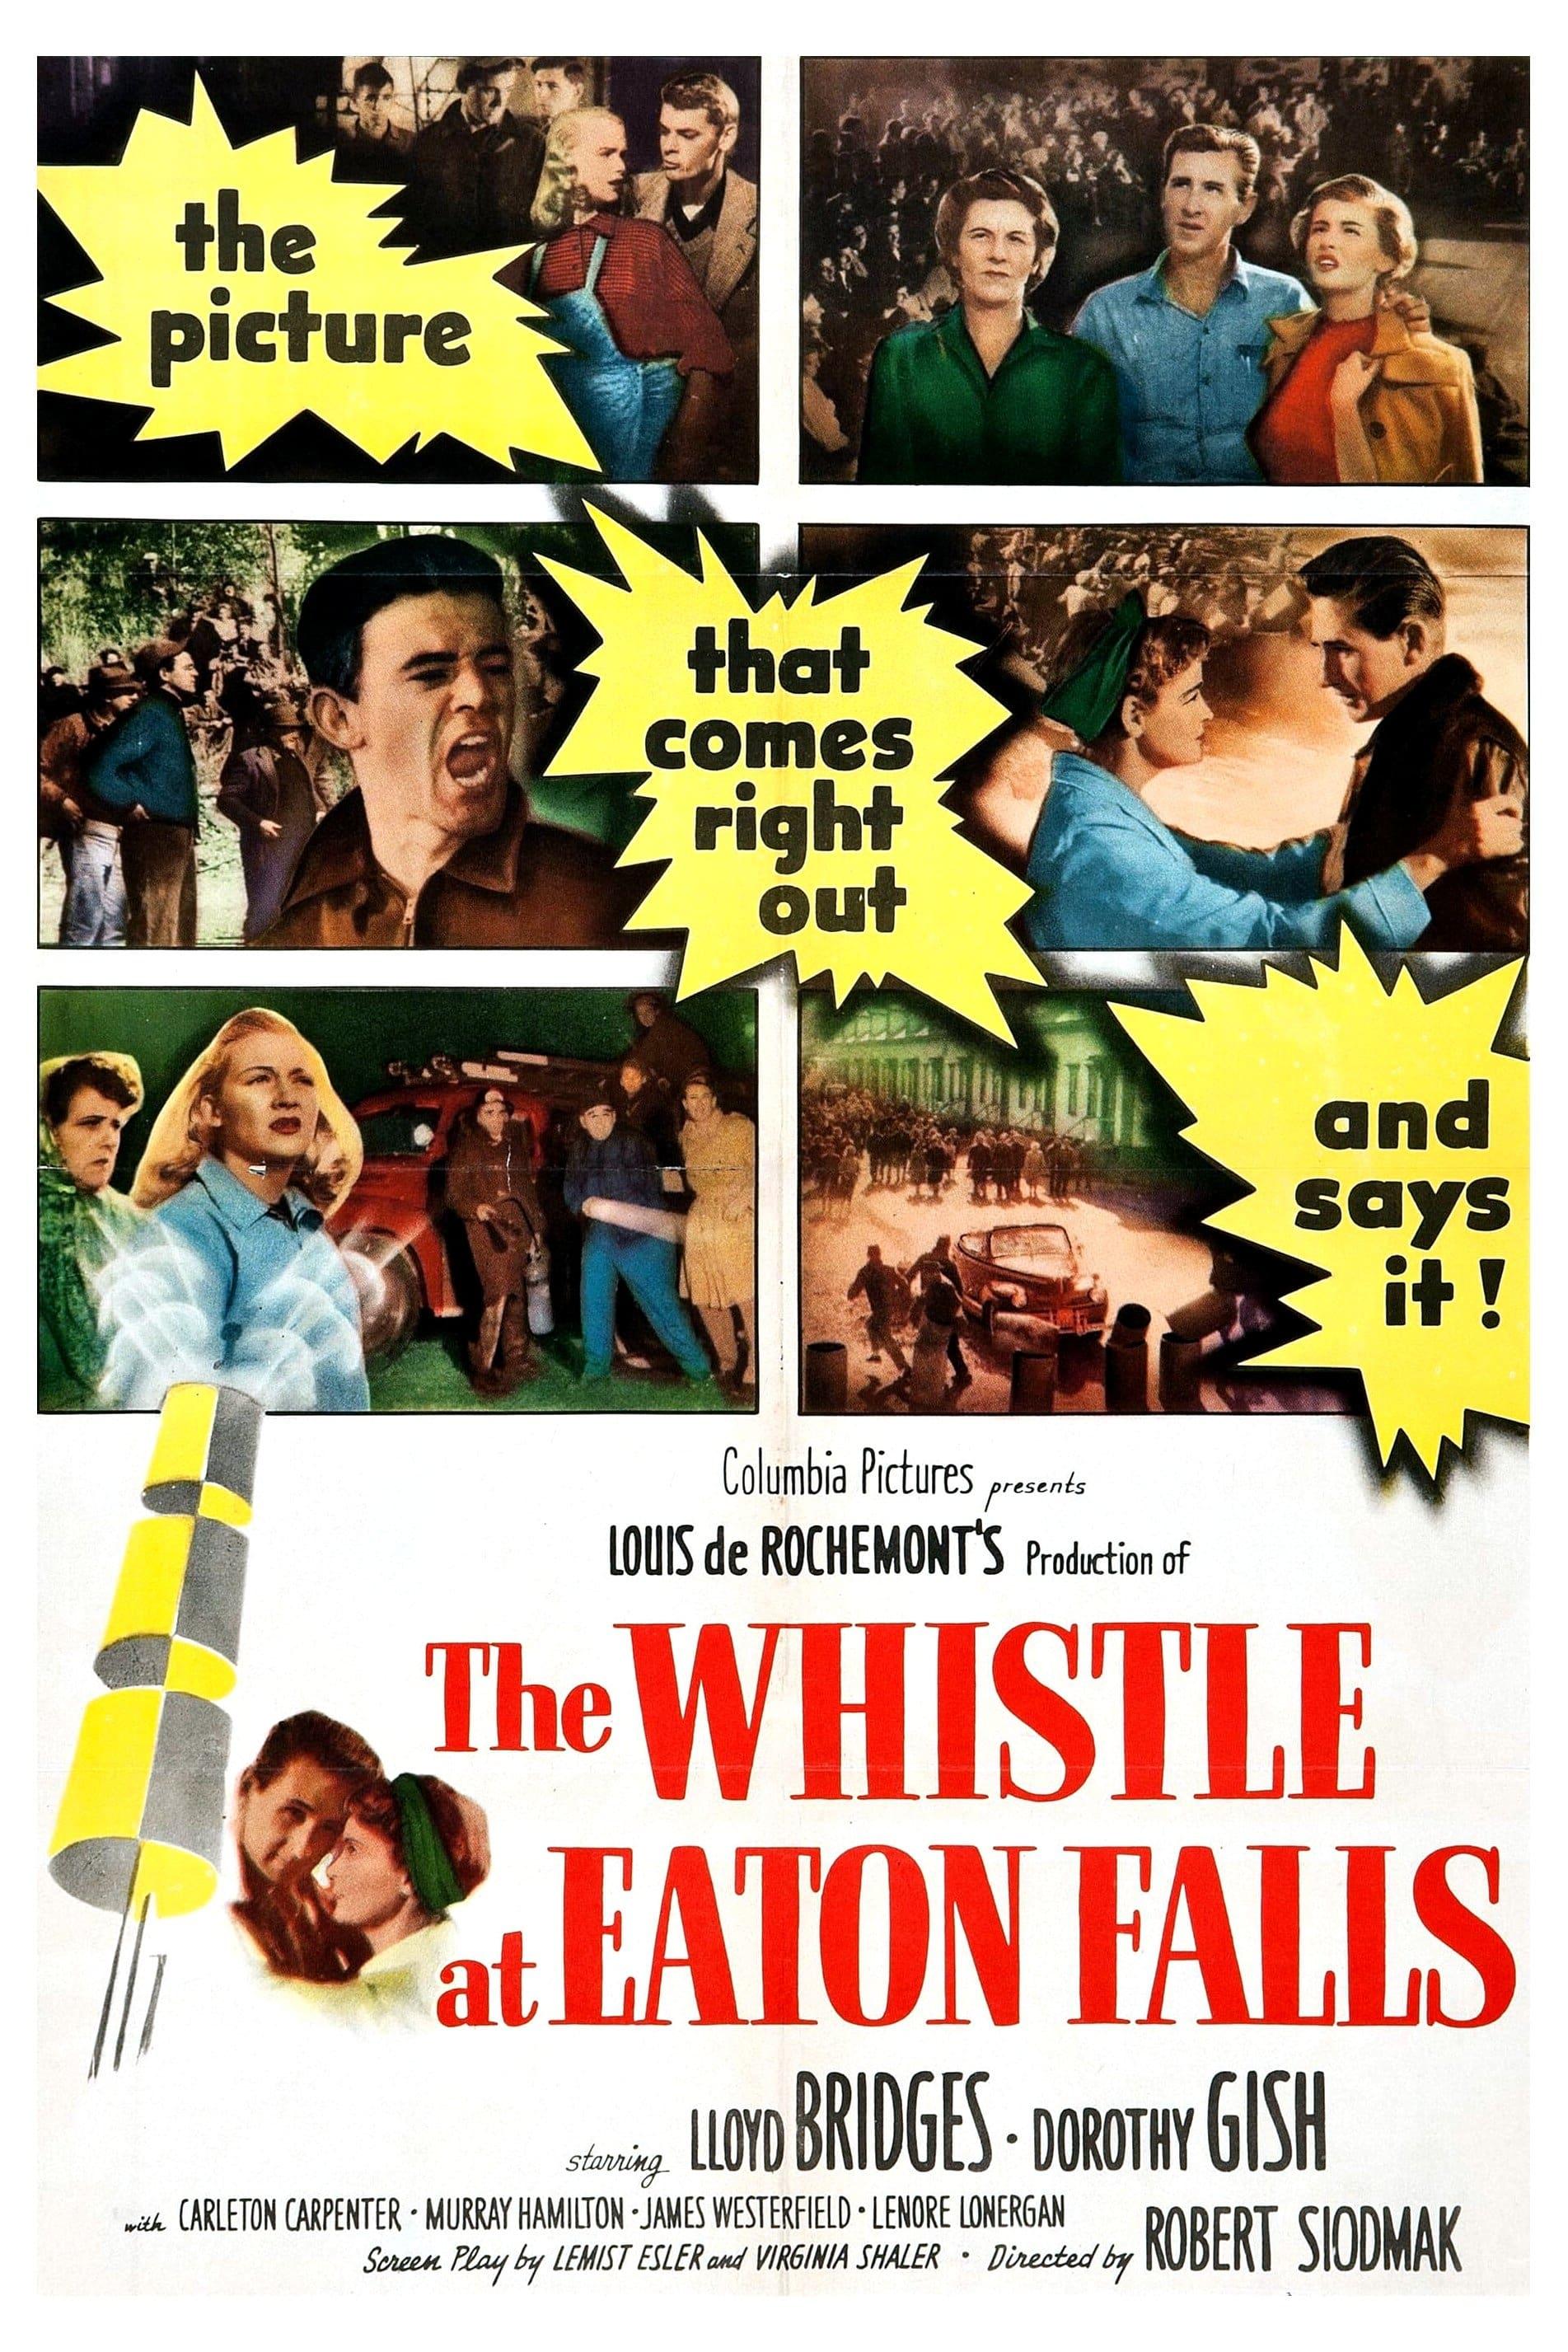 The Whistle at Eaton Falls poster